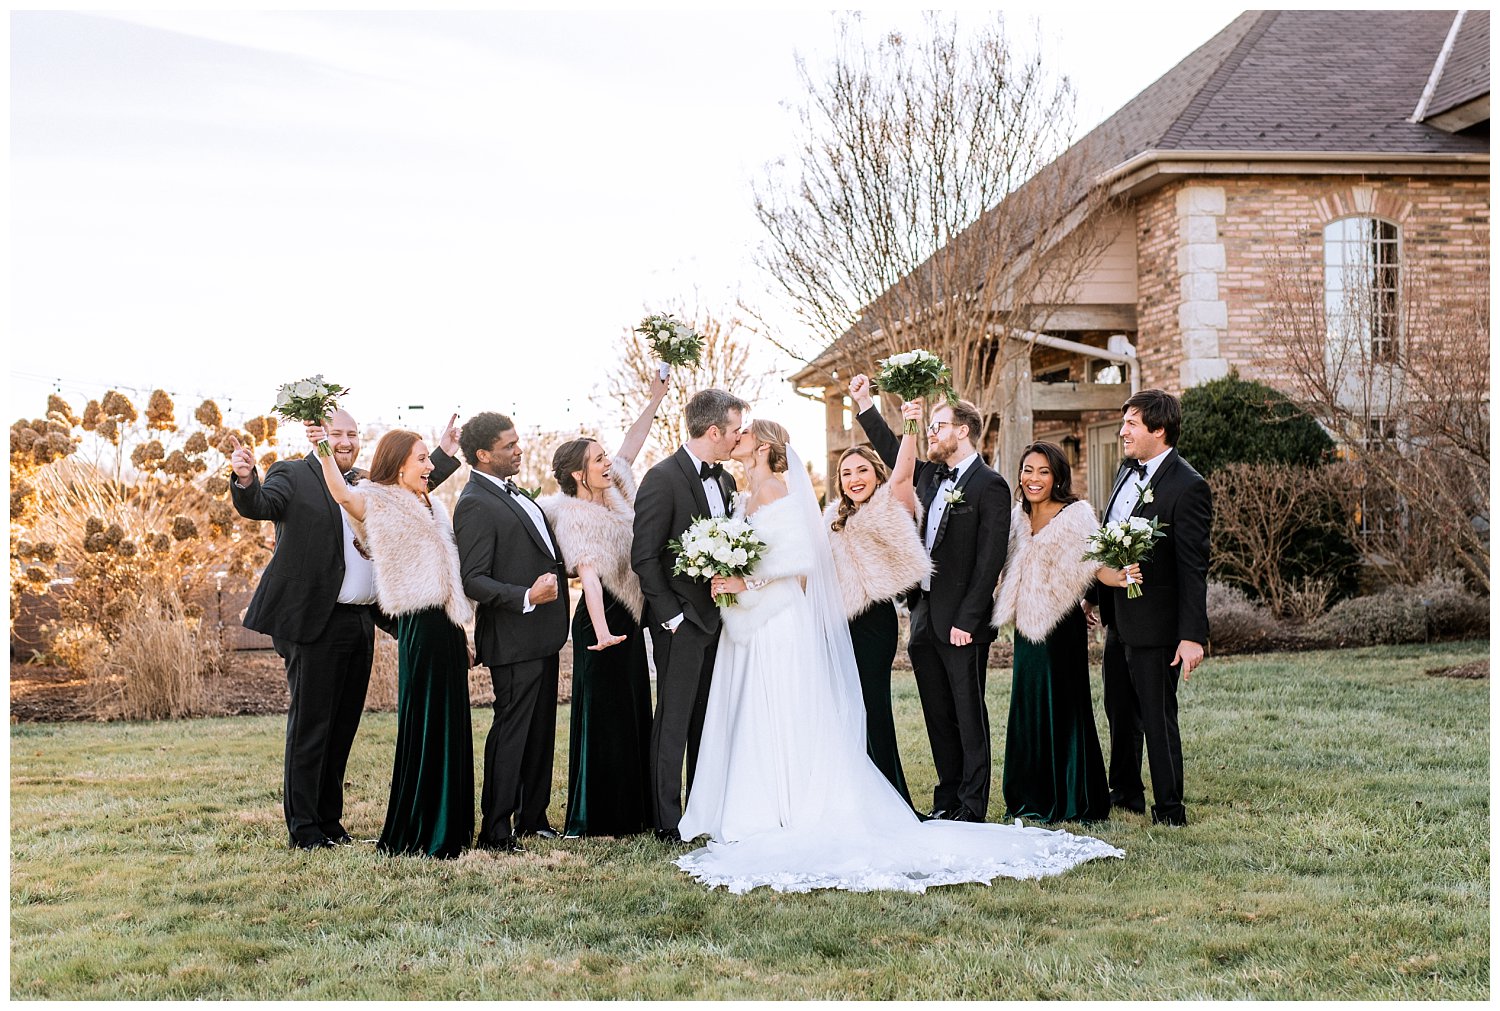 Bride and groom with wedding party at Early Mountain Vineyard in Charlottesville, Virginia